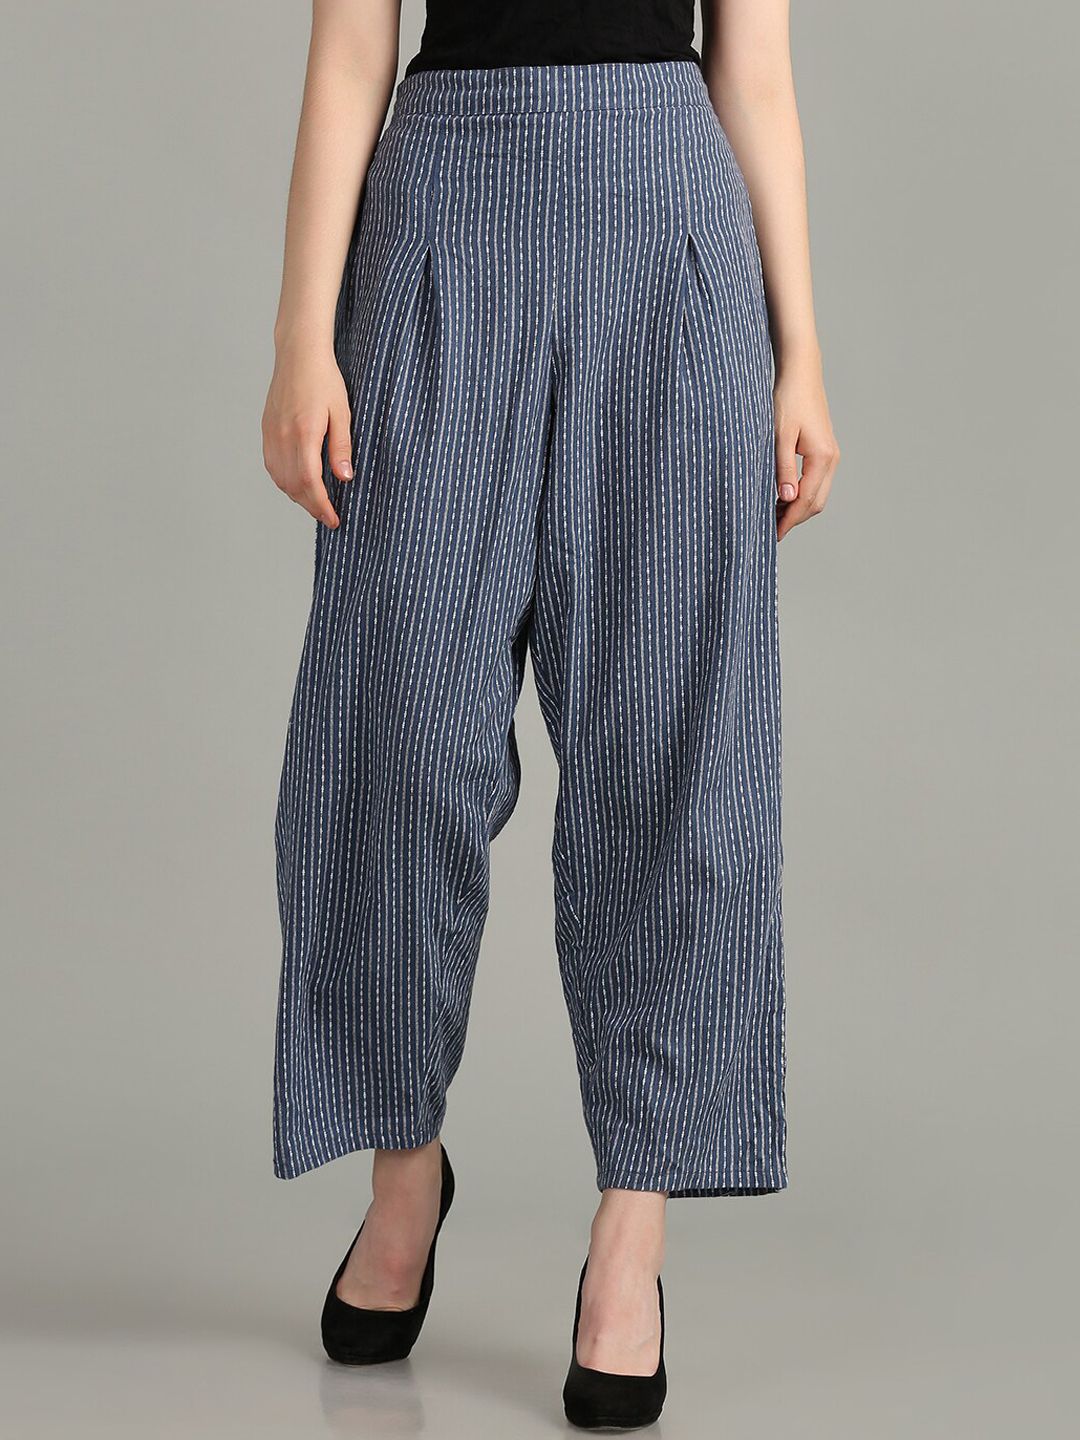 SAKIA Women Navy Blue Striped High-Rise Pleated Cotton Trousers Price in India